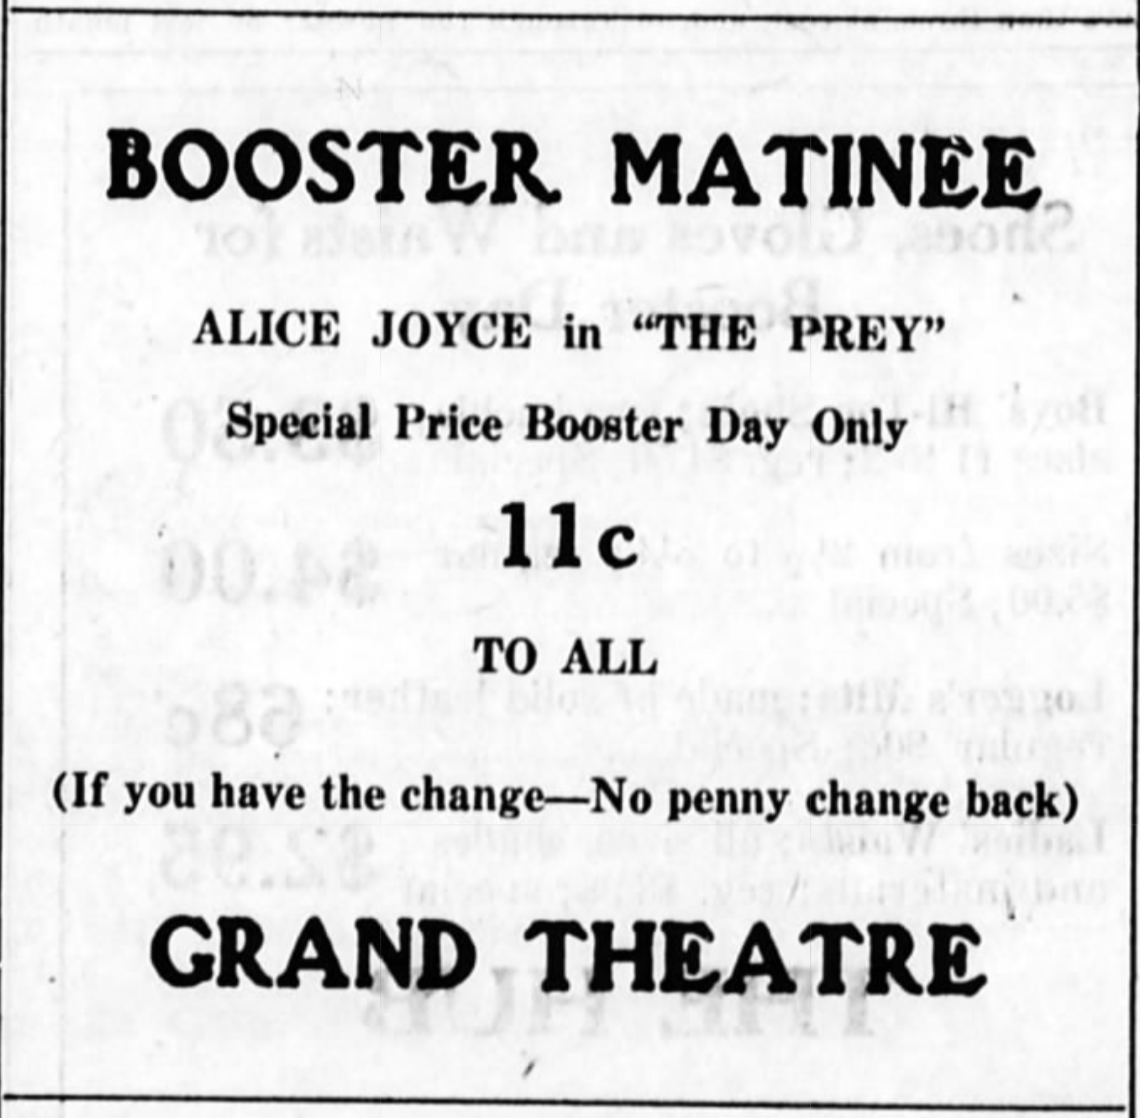 Advertisement for Booster Matinee